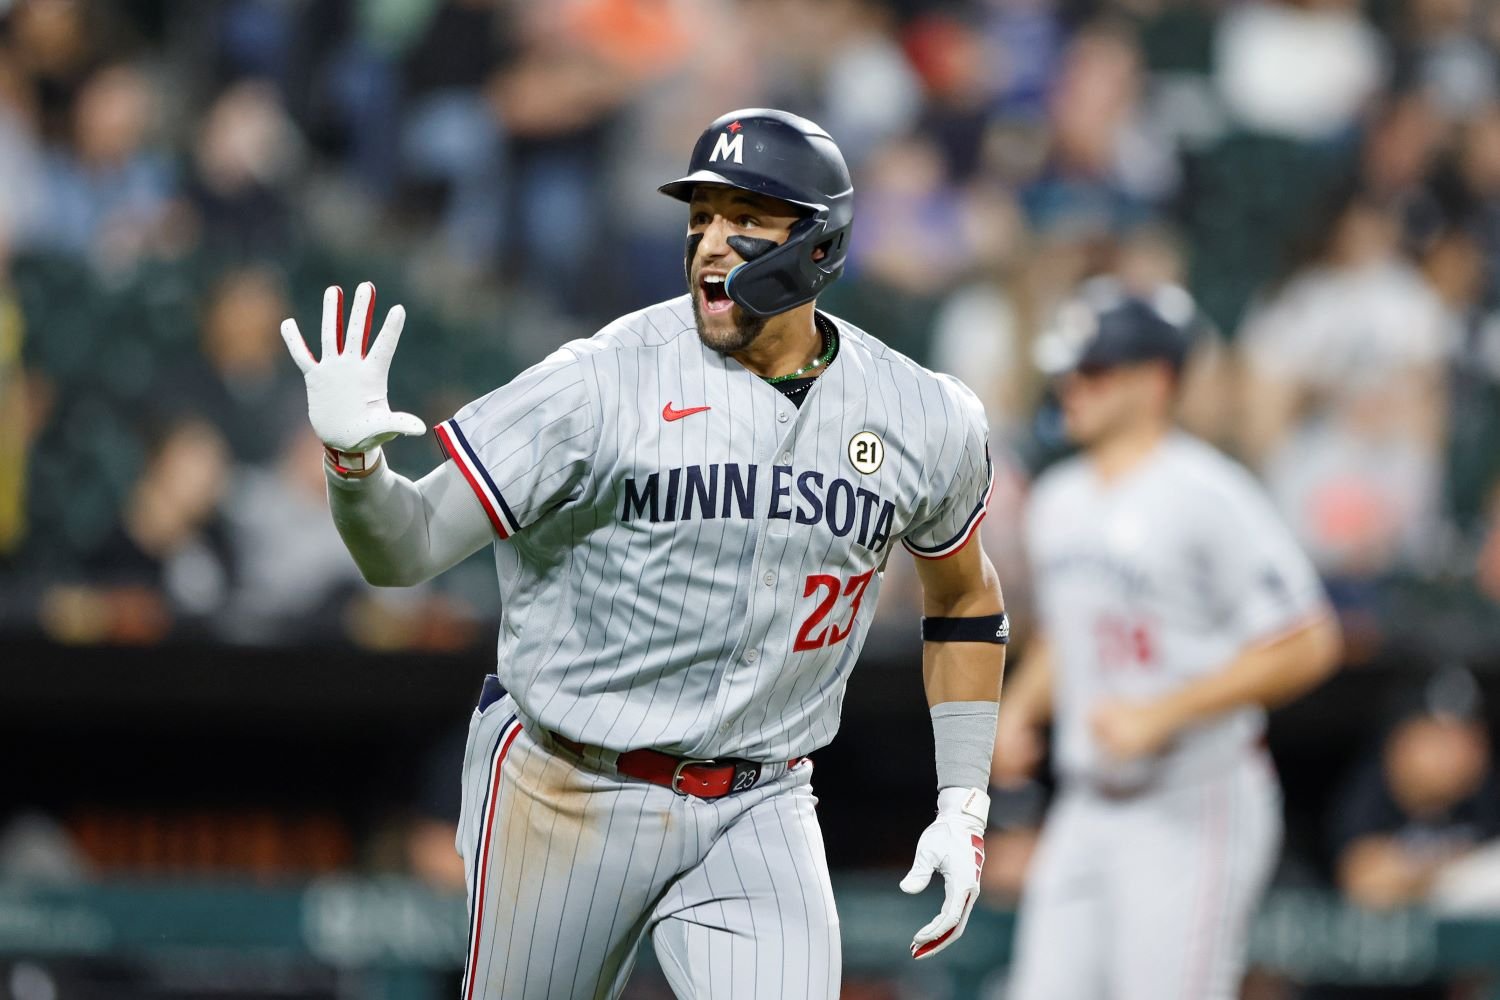 Twins' triple and 2 bases-loaded walks in 10th beat Texas - The